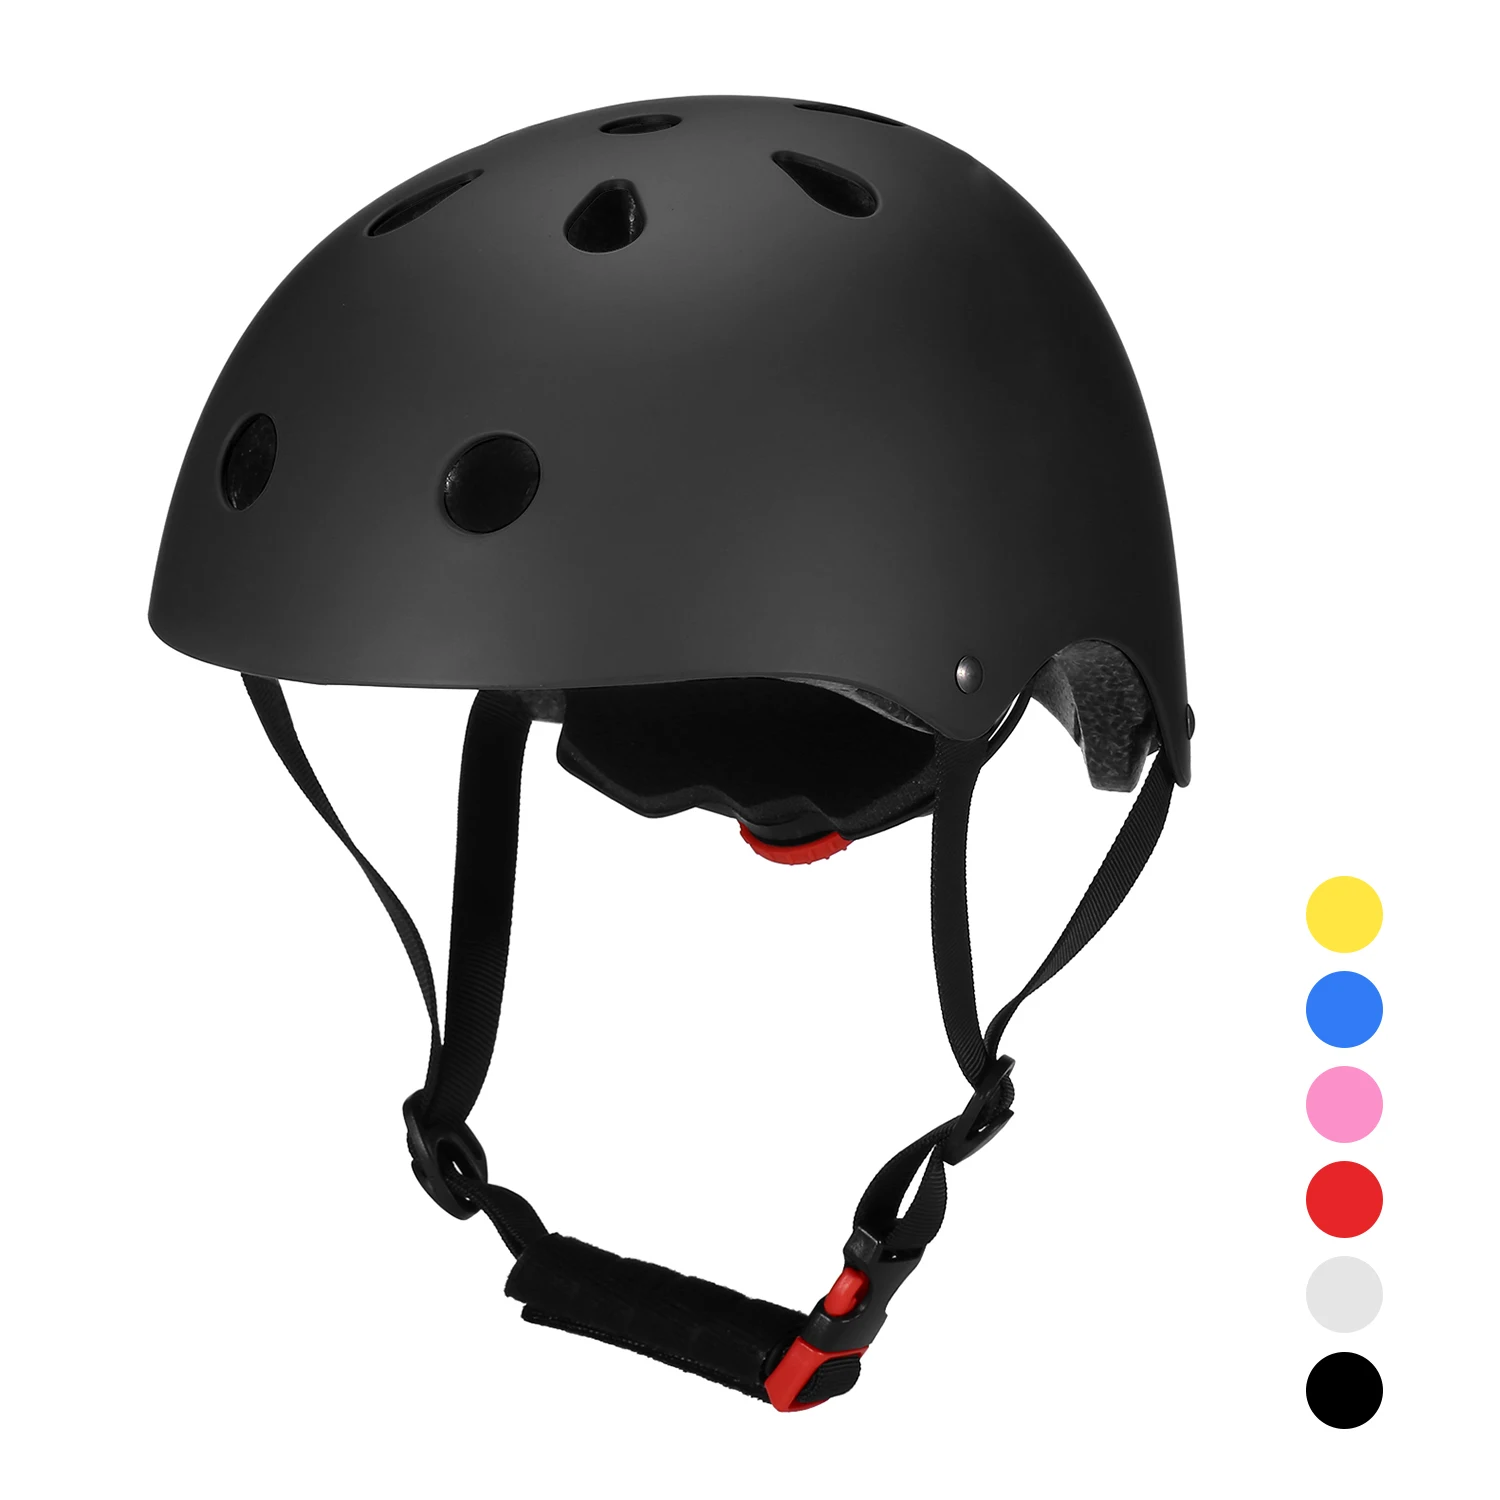 Bing Sports Cycling Safety Helmet with Adjustable Straps 